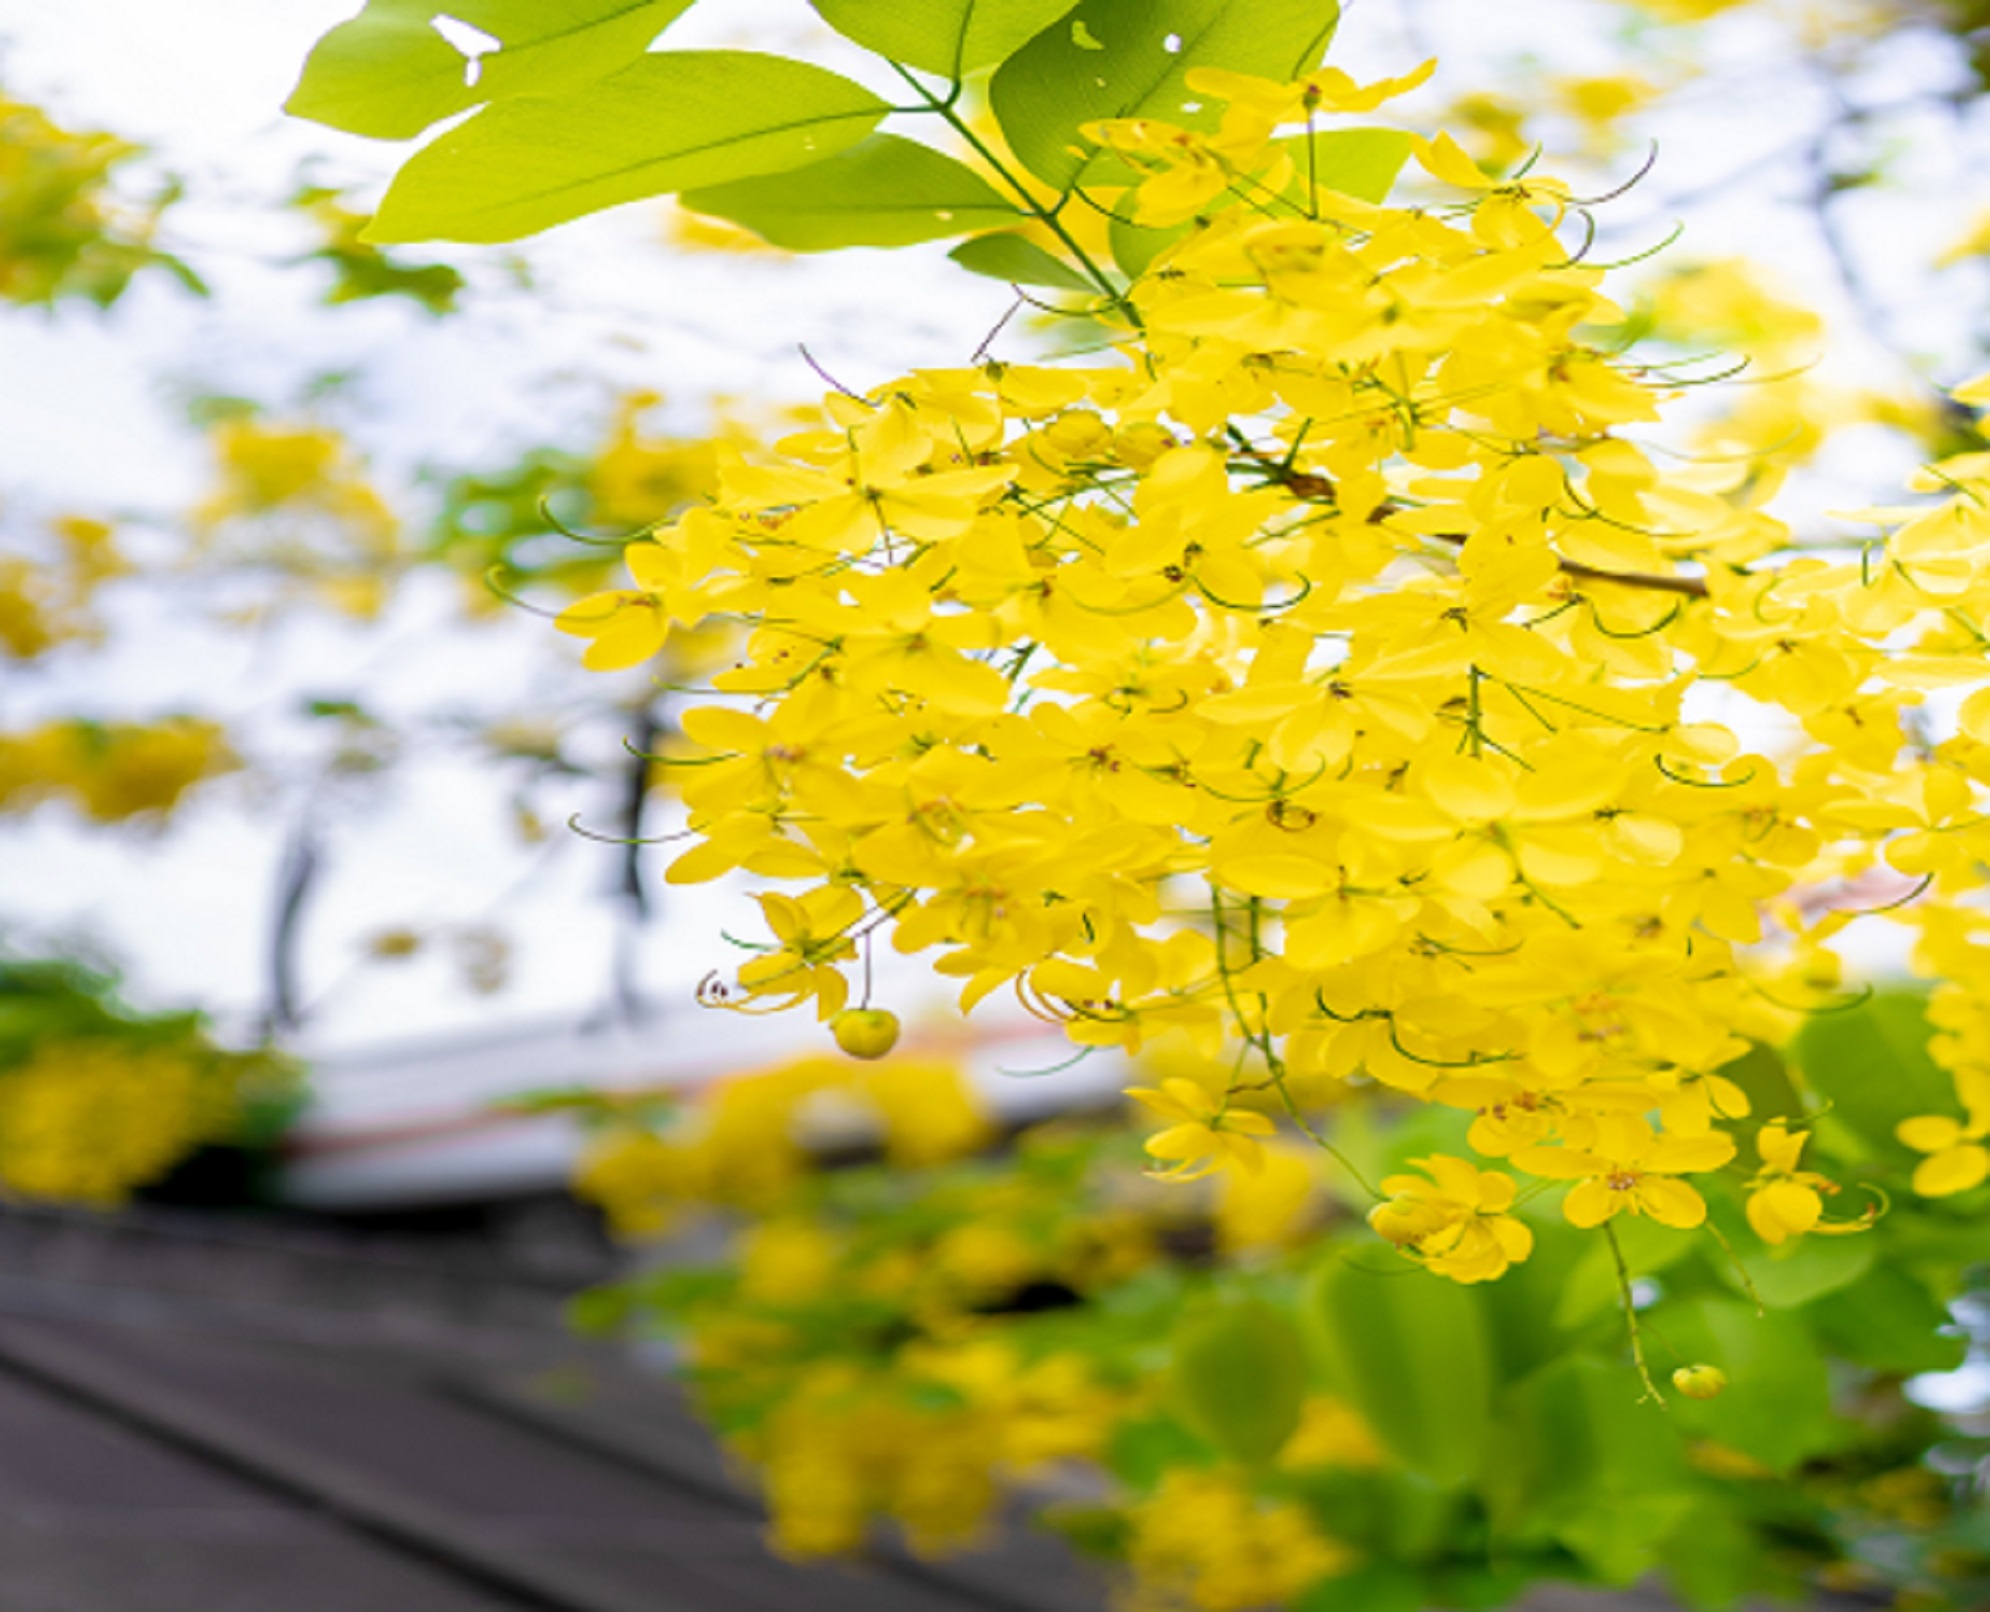 A beautiful tree with yellow flowers